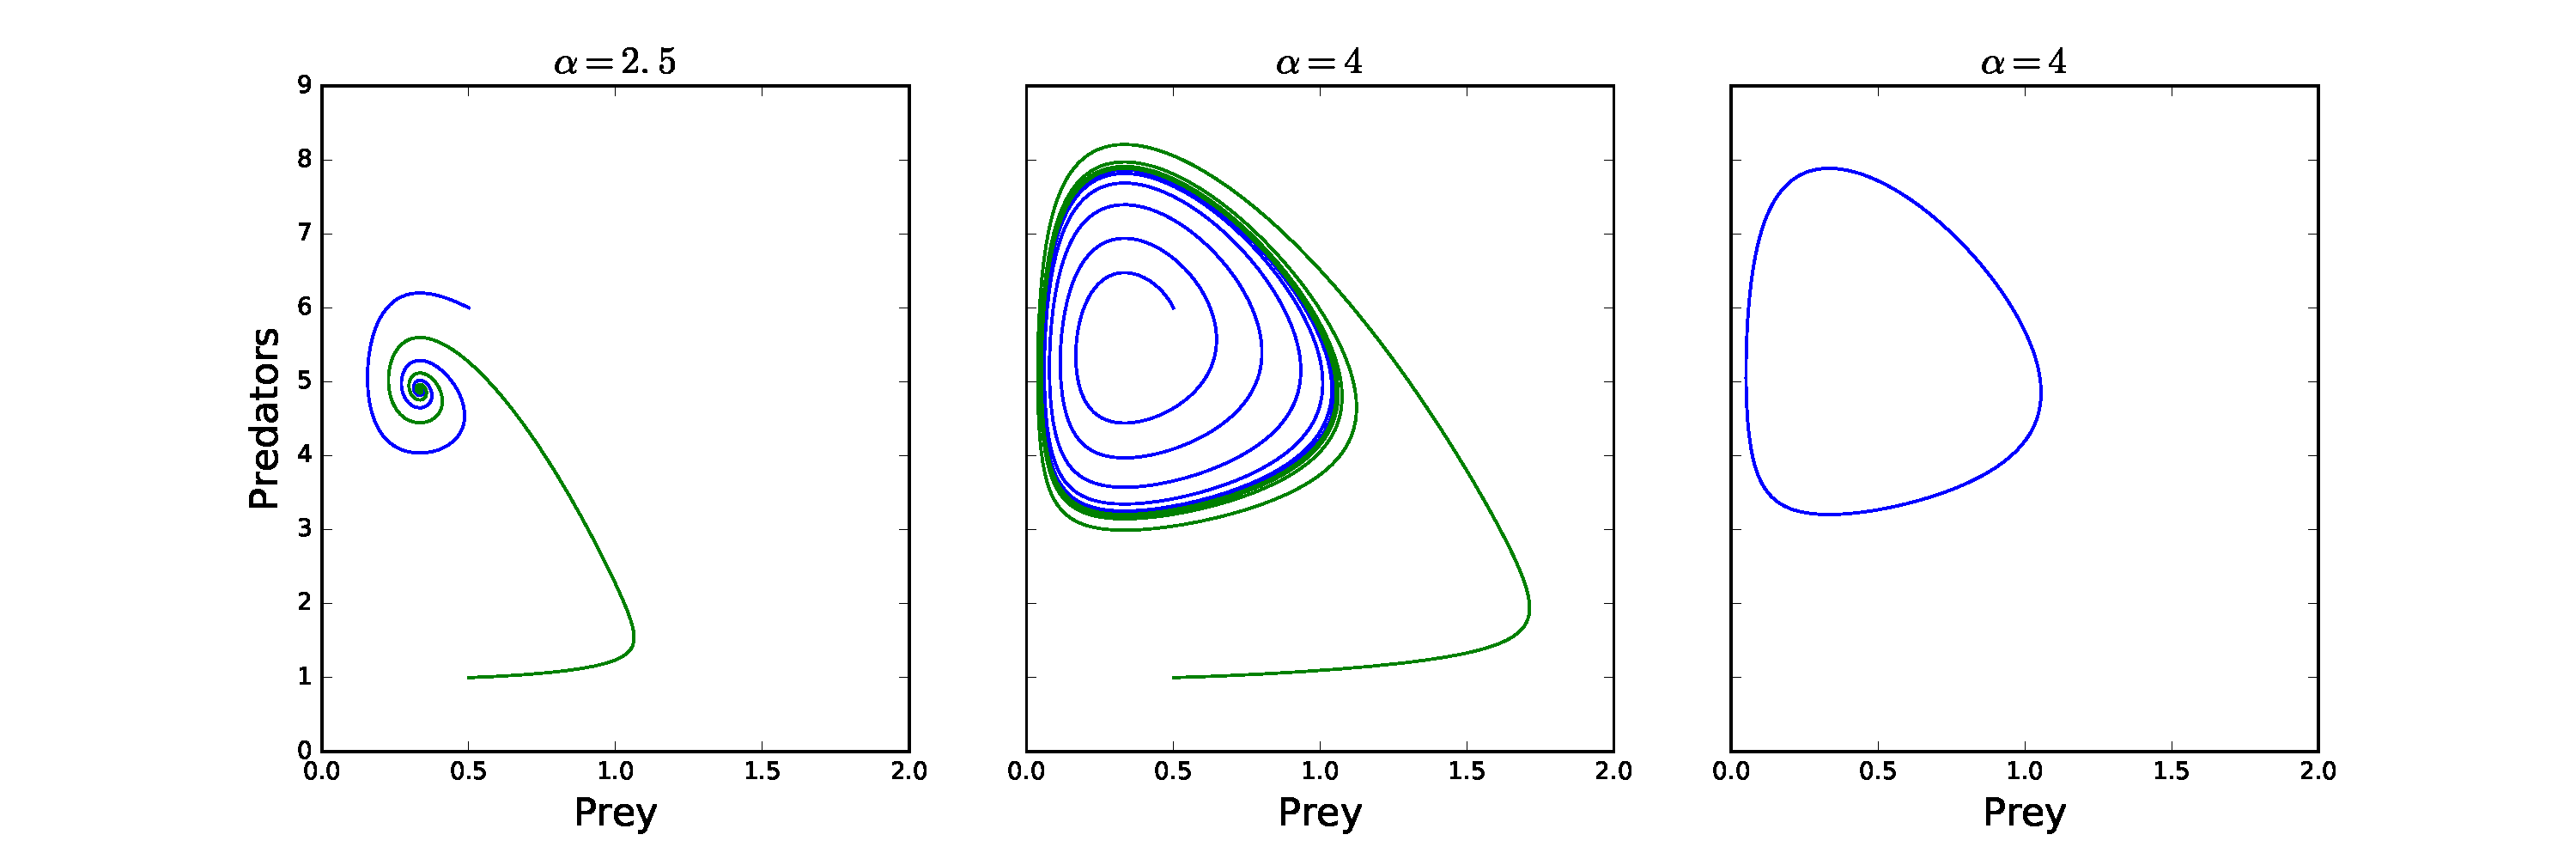 Three images of trajectories in phase space. In ecah case predator densities are on the vertical axis with values from 0 to 9 and prey densities are on the horizontal axis with values from 0 to 2.1. Two trajectories are shown spiralling anti-clockwise into an equilibrium near prey=0.4 and predators=5. 2. Two trajectories approach a limit cycle, both moving anti-clockwise. One starts 'inside' the cycle spiralling outwards and one starts 'outside' the cycle spiralling inwards. 3. A single close limit cycle is shown.